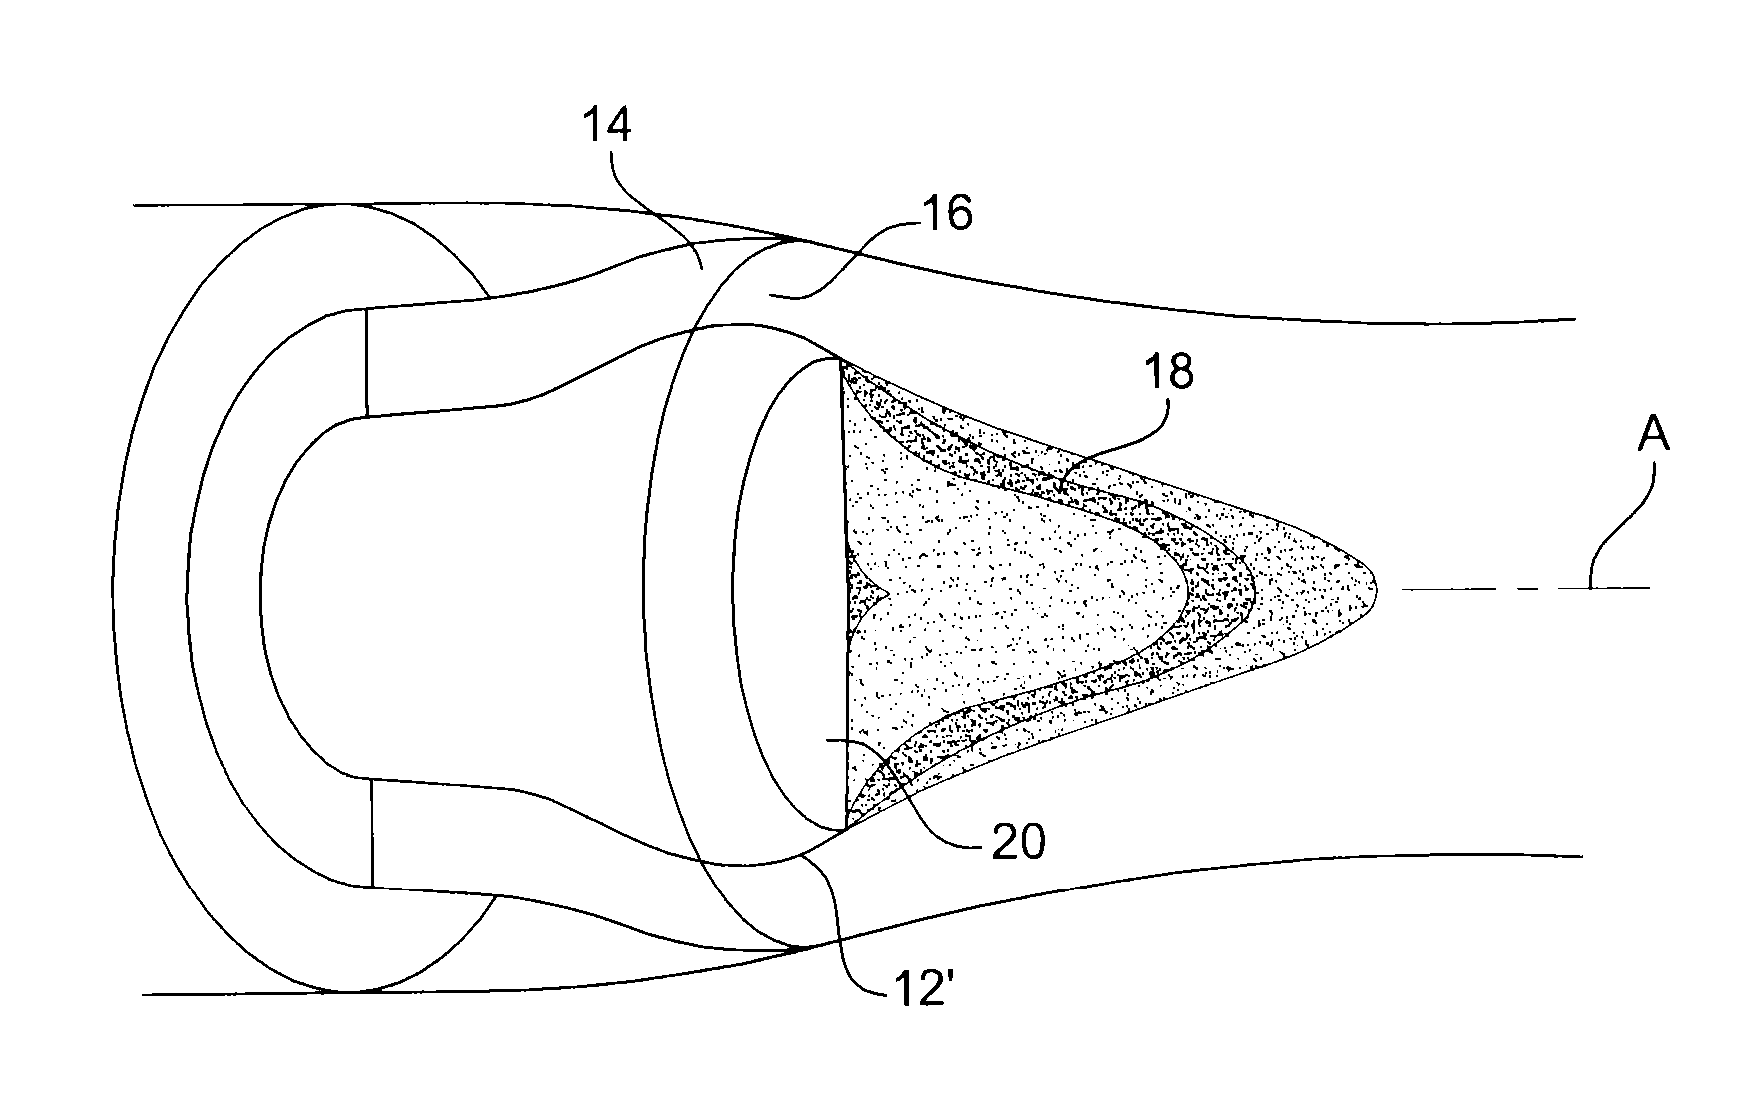 Exhaust centerbody for a turbine engine